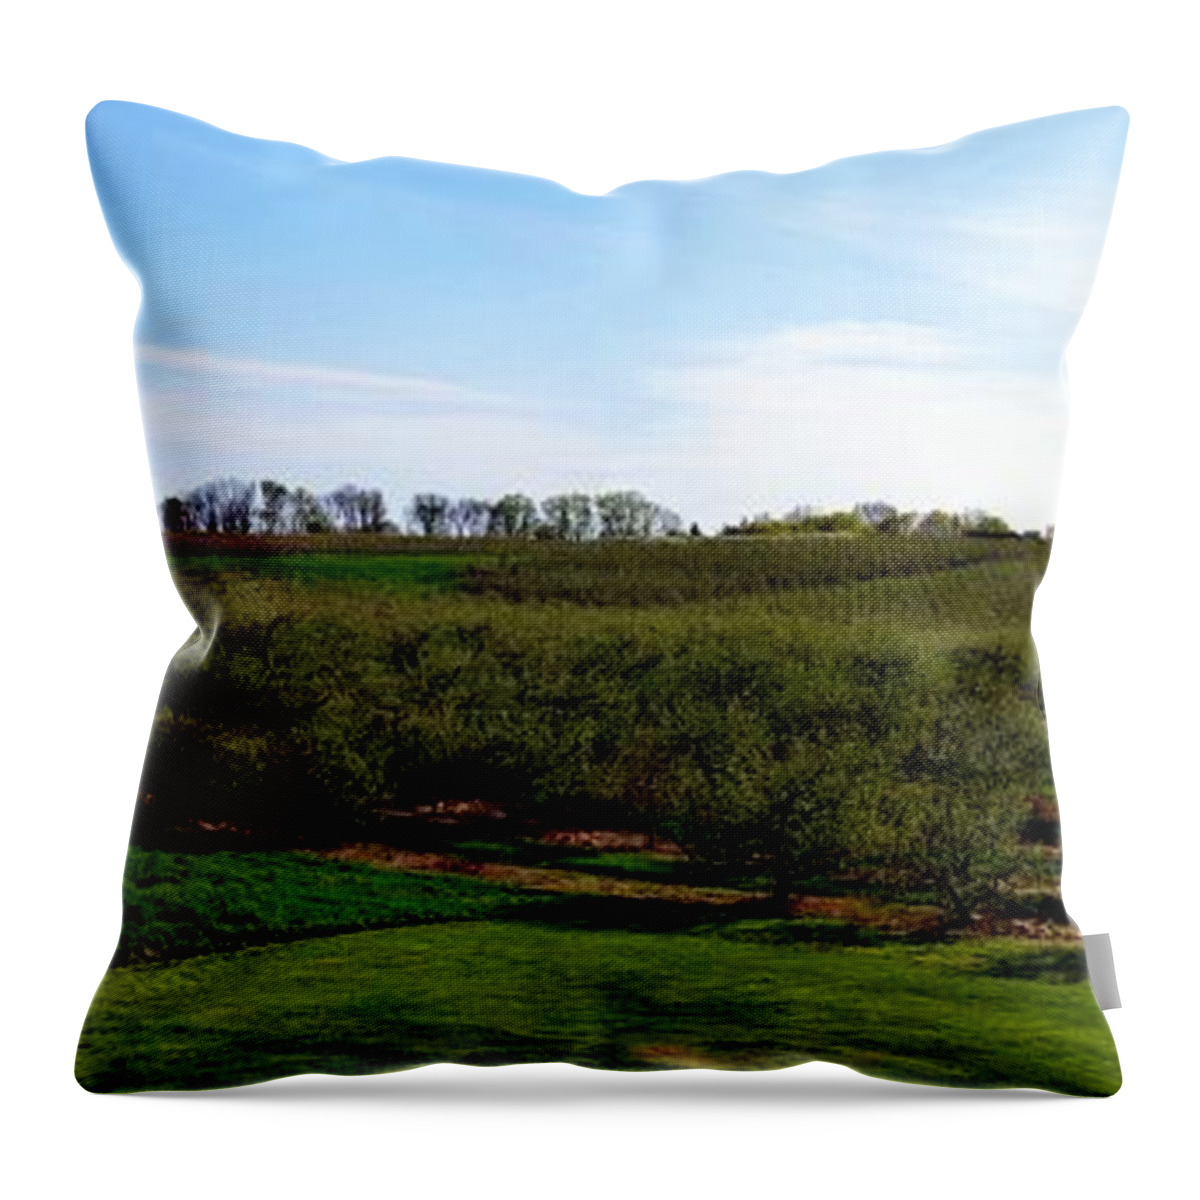 Orchard Throw Pillow featuring the photograph Crane Orchards by Michelle Calkins